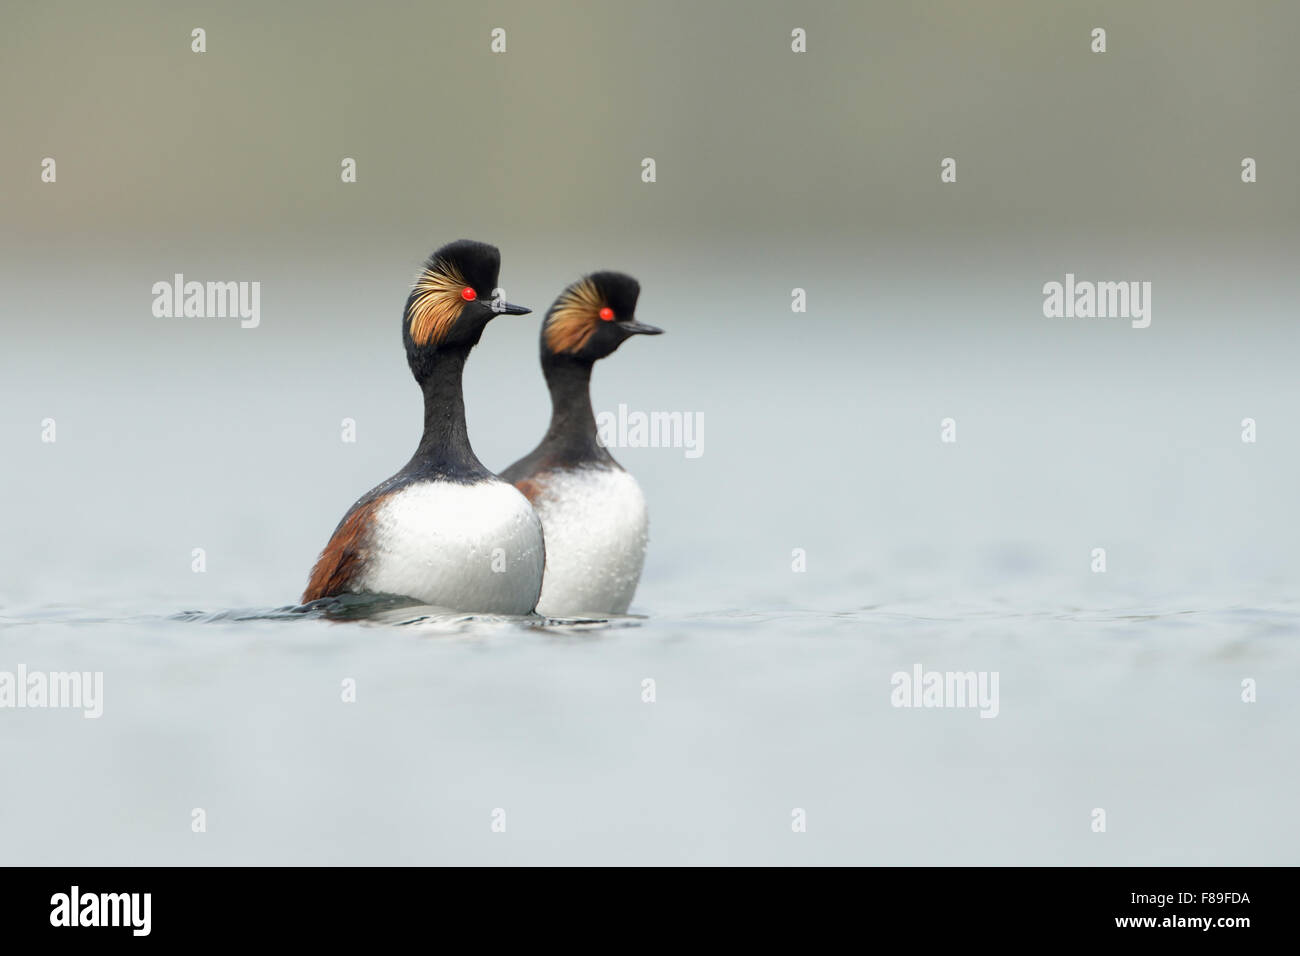 Black-necked Grebes / Eared Grebes ( Podiceps nigricollis ) while parallel dancing, courtship behavior, mating display. Stock Photo